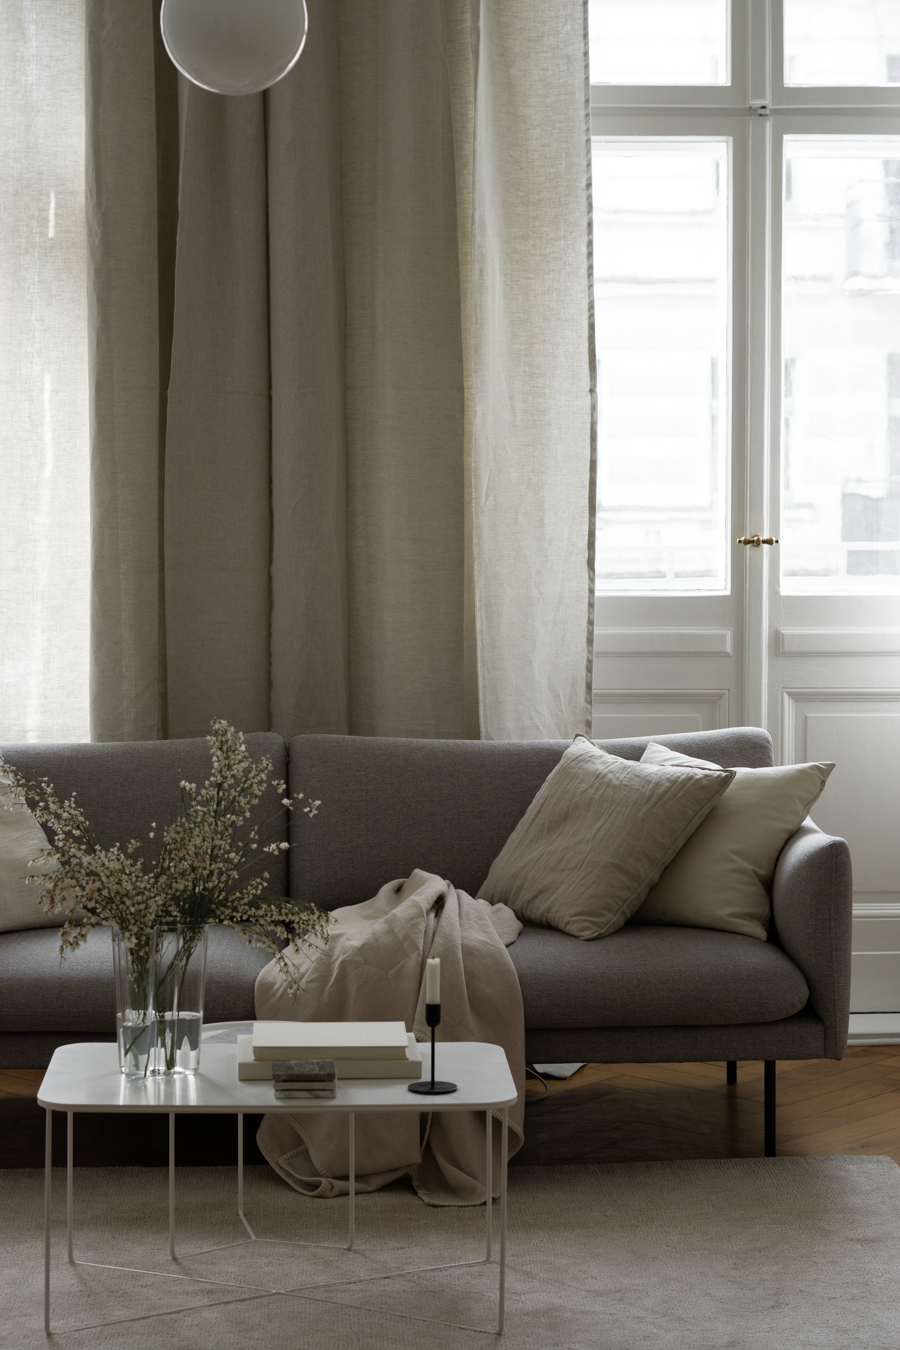 Grey Living Room Curtains